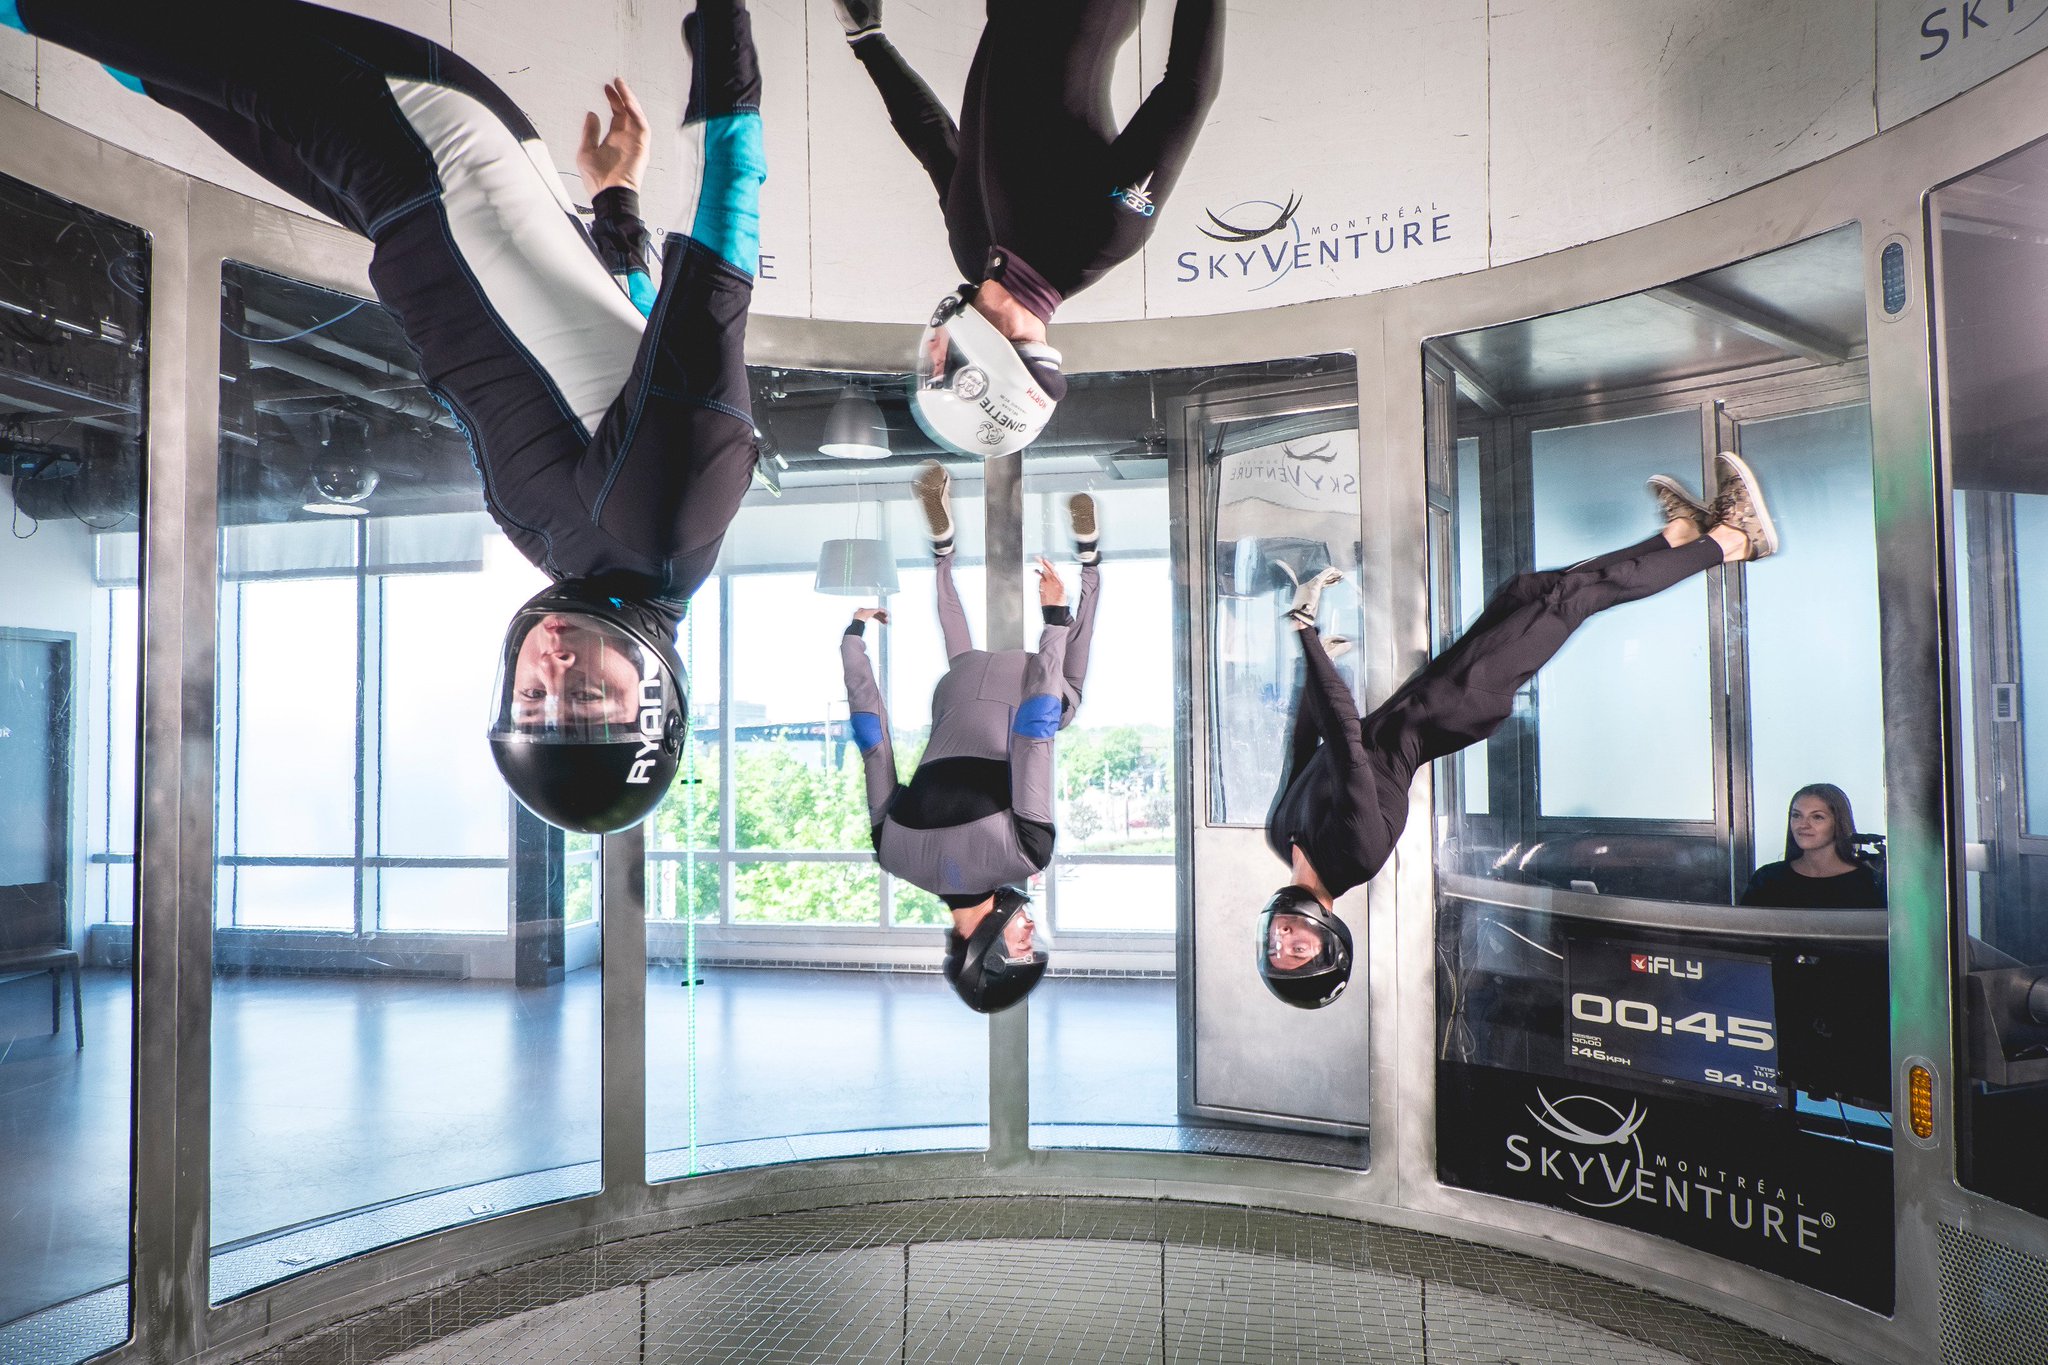 2nd FAI World Indoor Skydiving Championships World Air Sports Federation